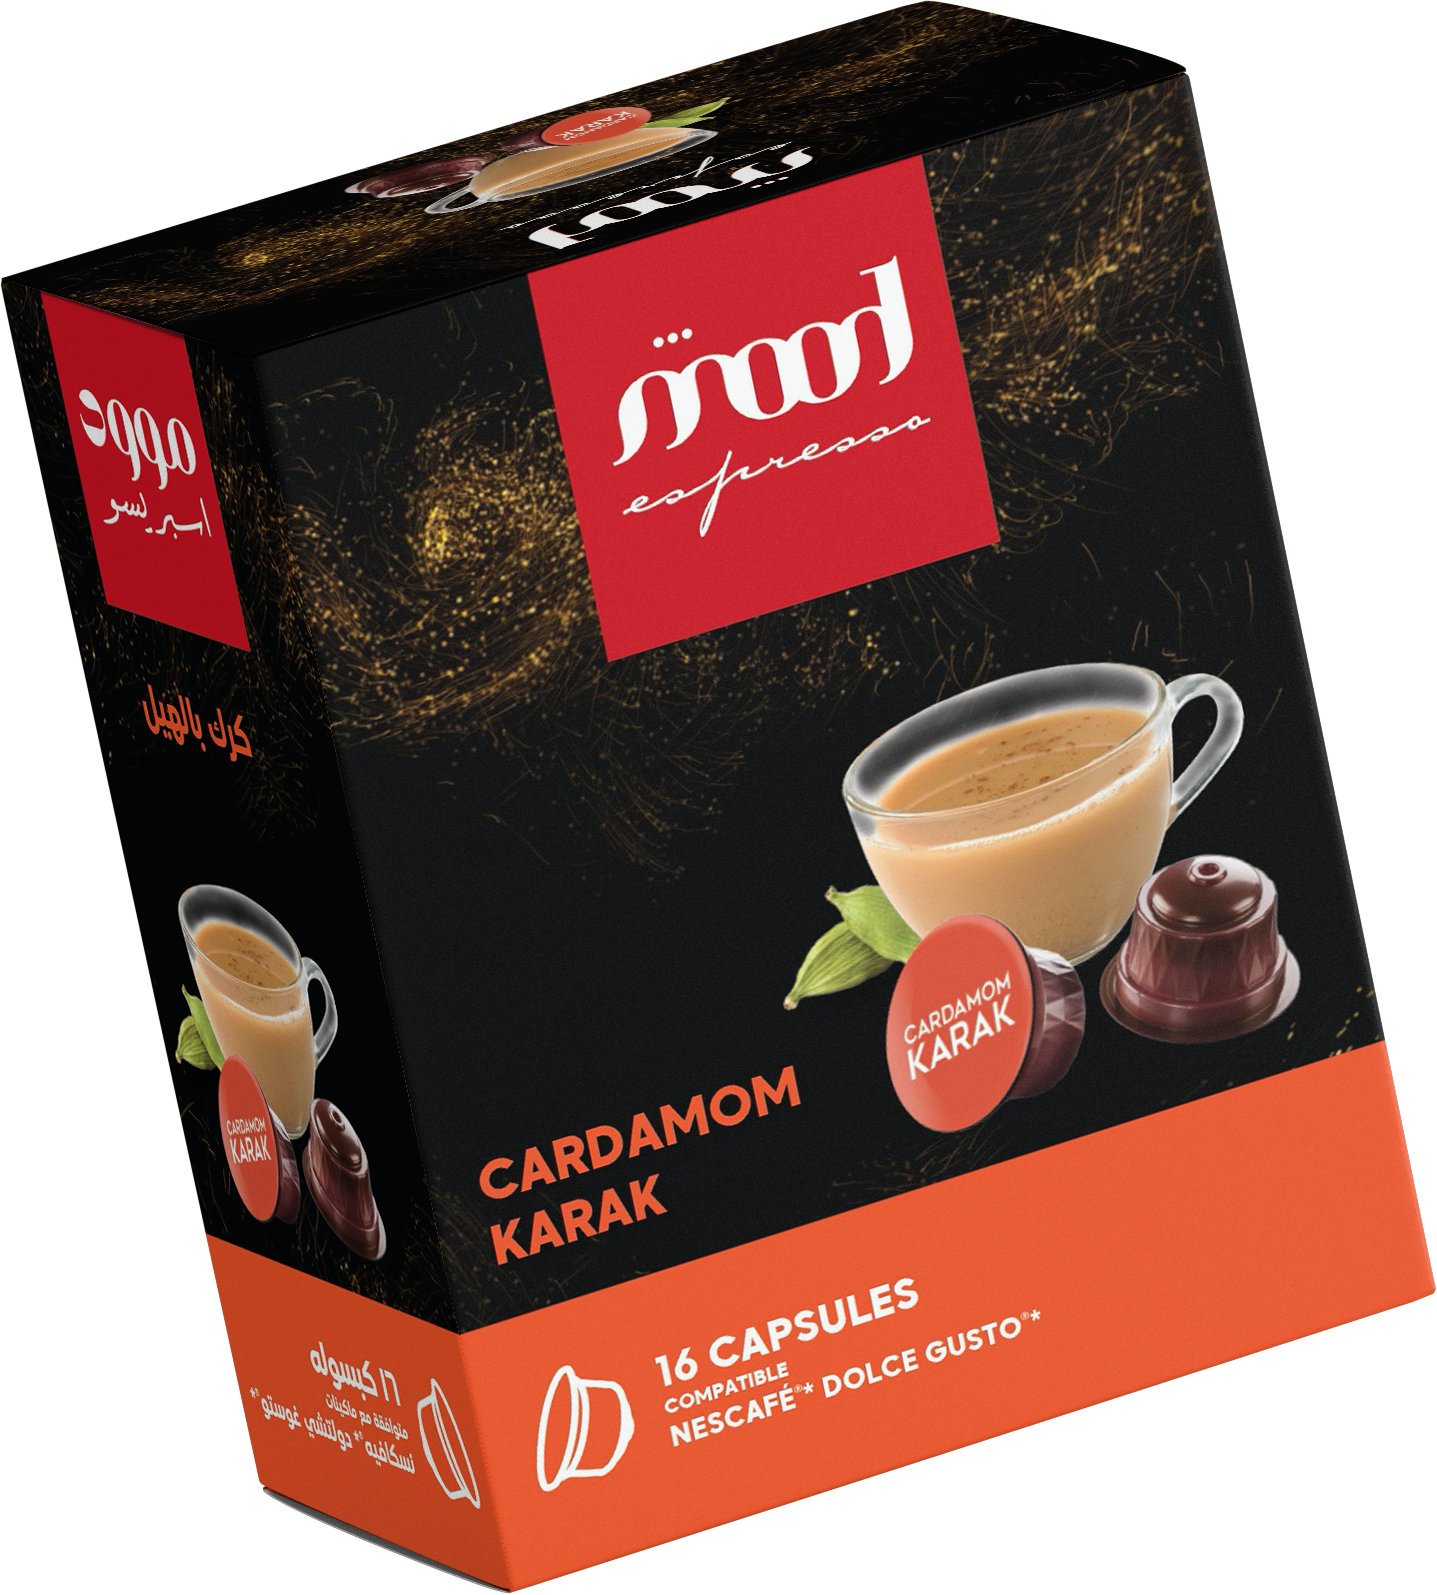 mood espresso - Dolce gusto nescafe offer bundle -pack of eight-pack of 8-dolce gusto Discovery pack-cardamom karak tea